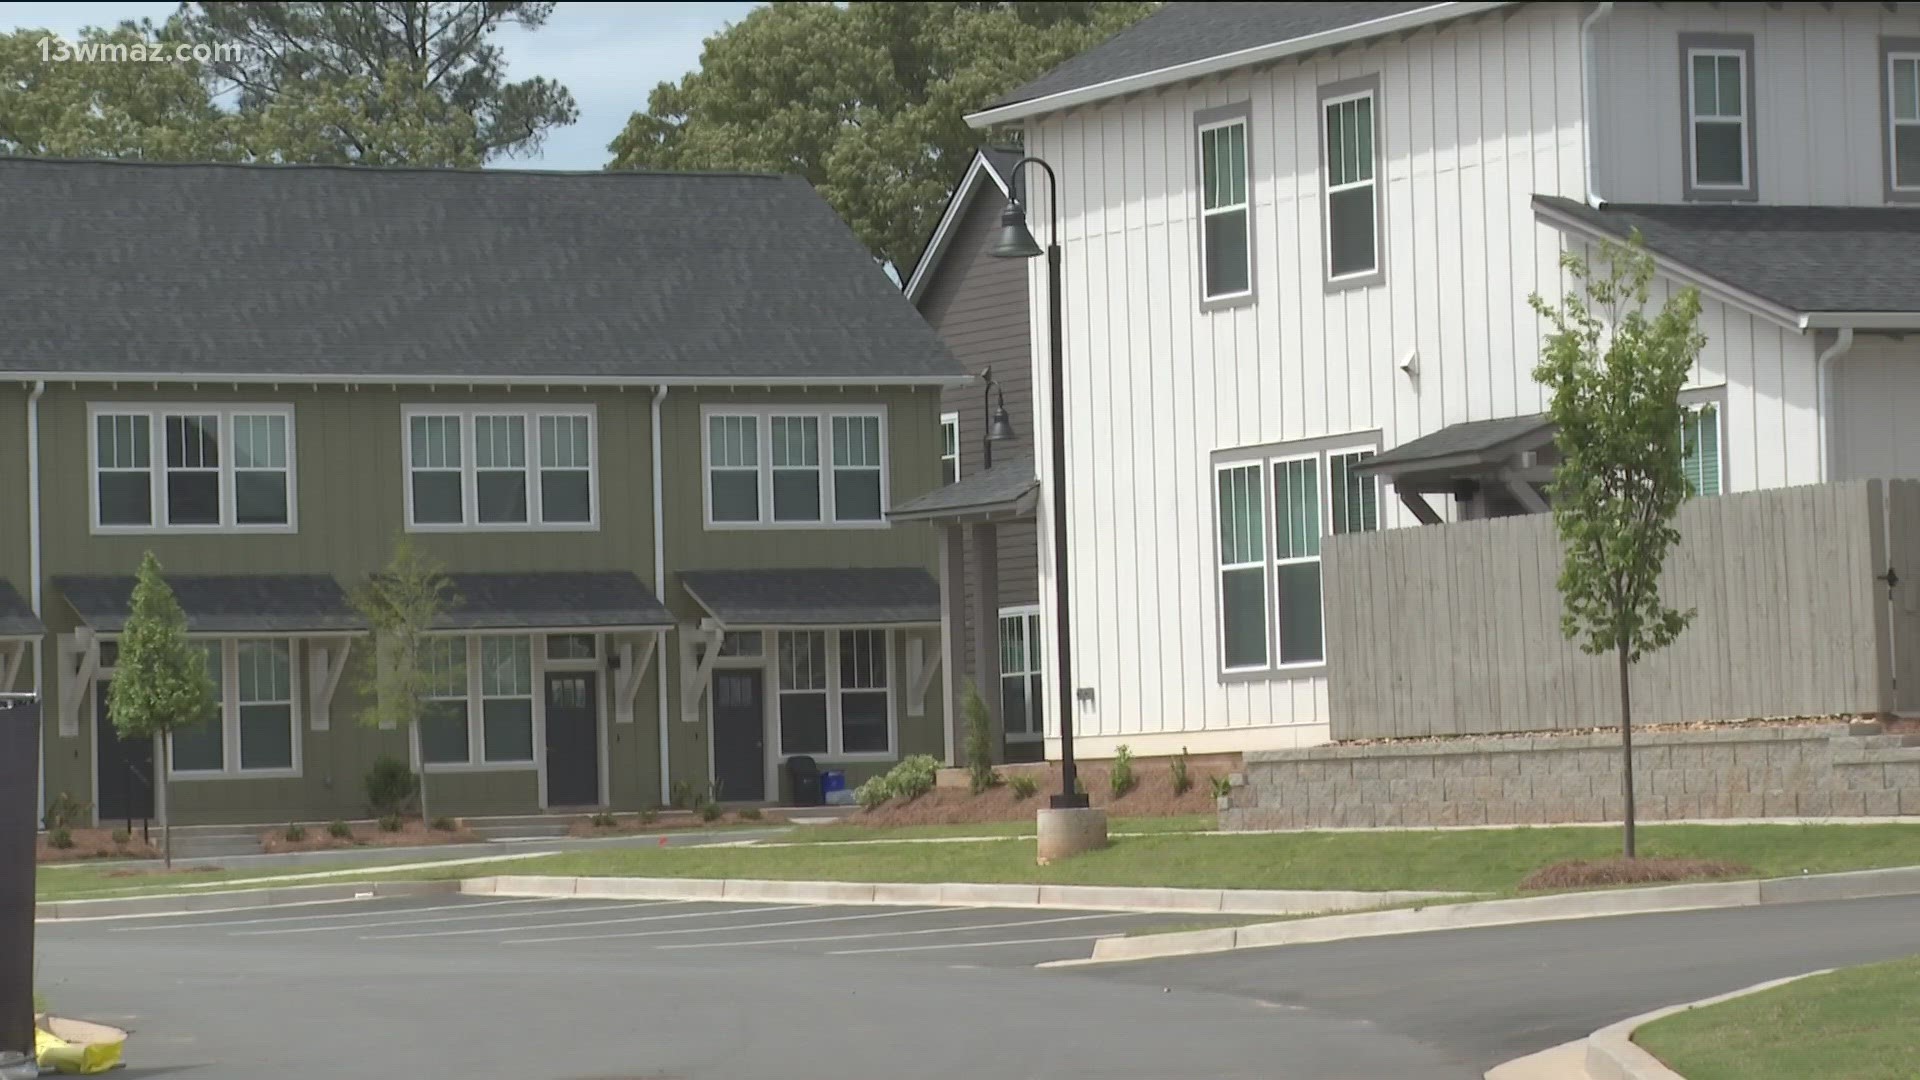 As Warner Robins' population quickly increases, so do the number of housing developments. They have seen a 50 percent spike in the number of multi-family units